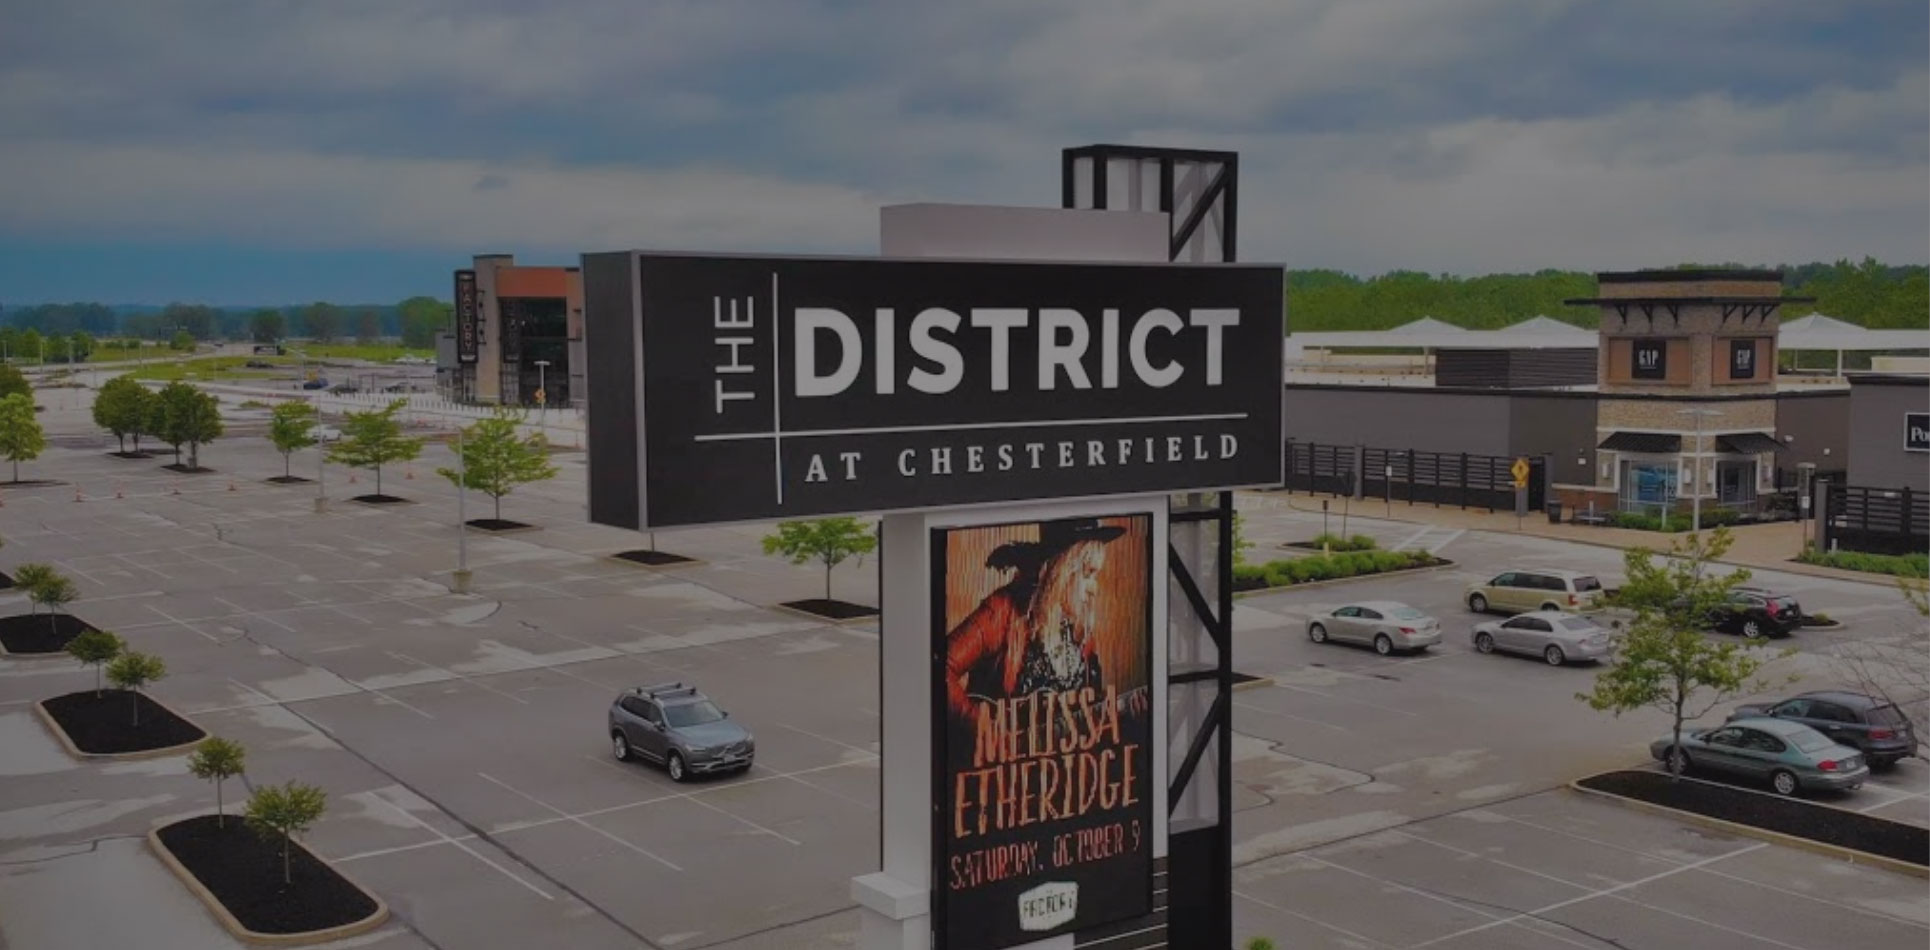 The District at Chesterfield